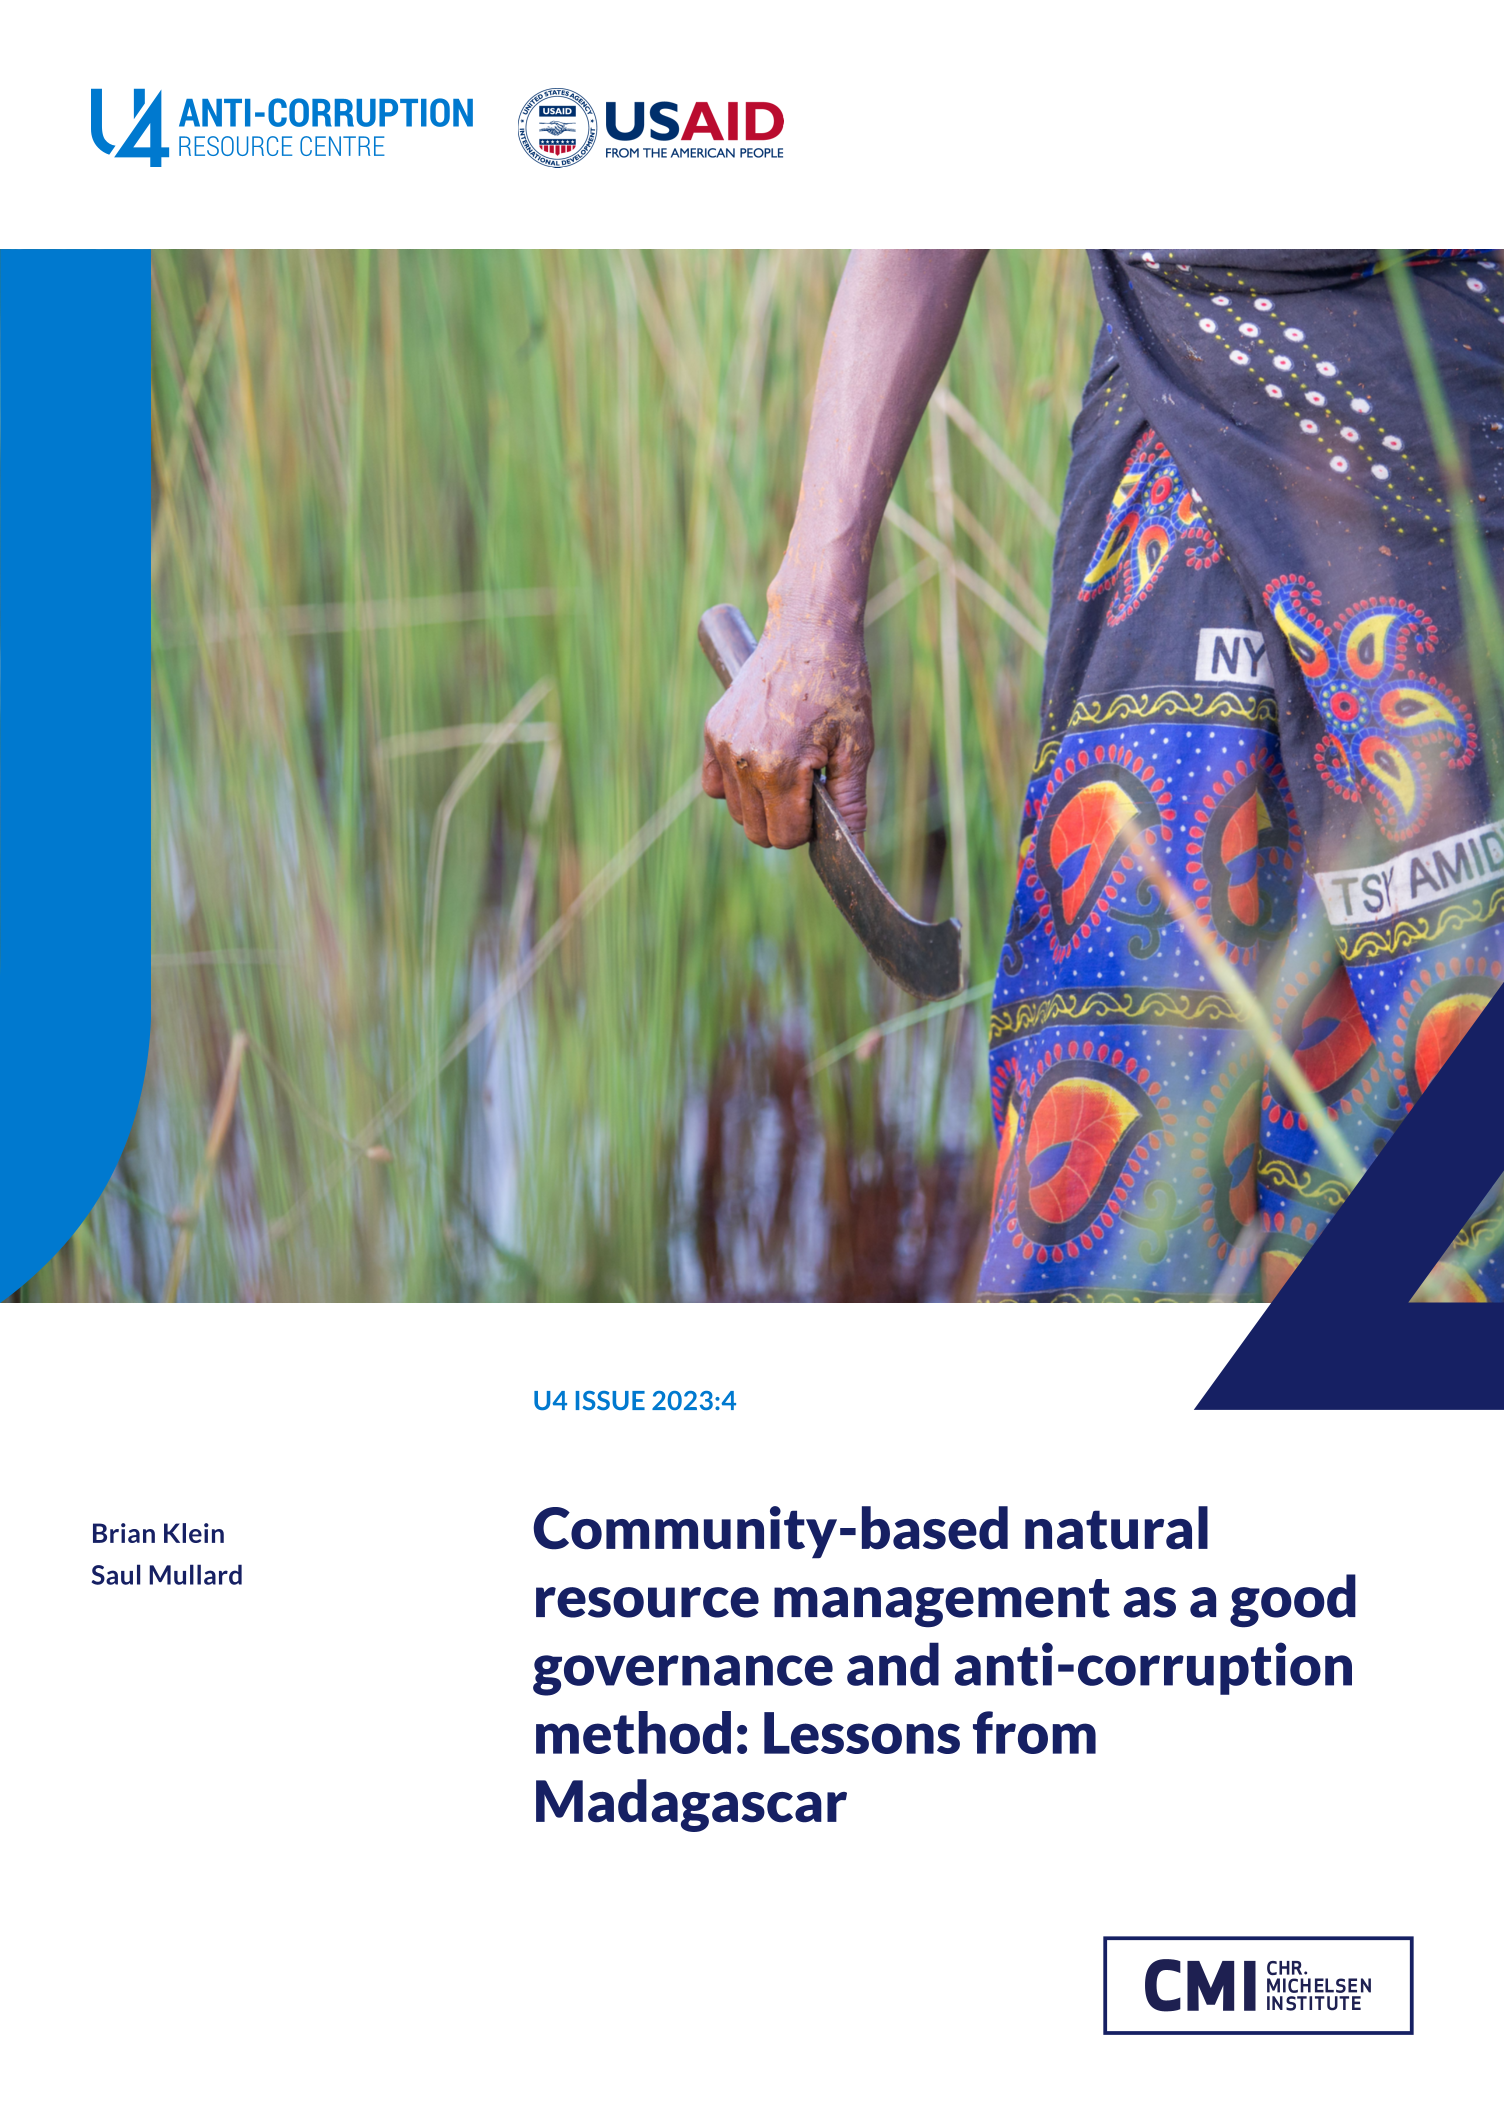 Community-based natural resource management as a good governance and anti-corruption method: Lessons from Madagascar